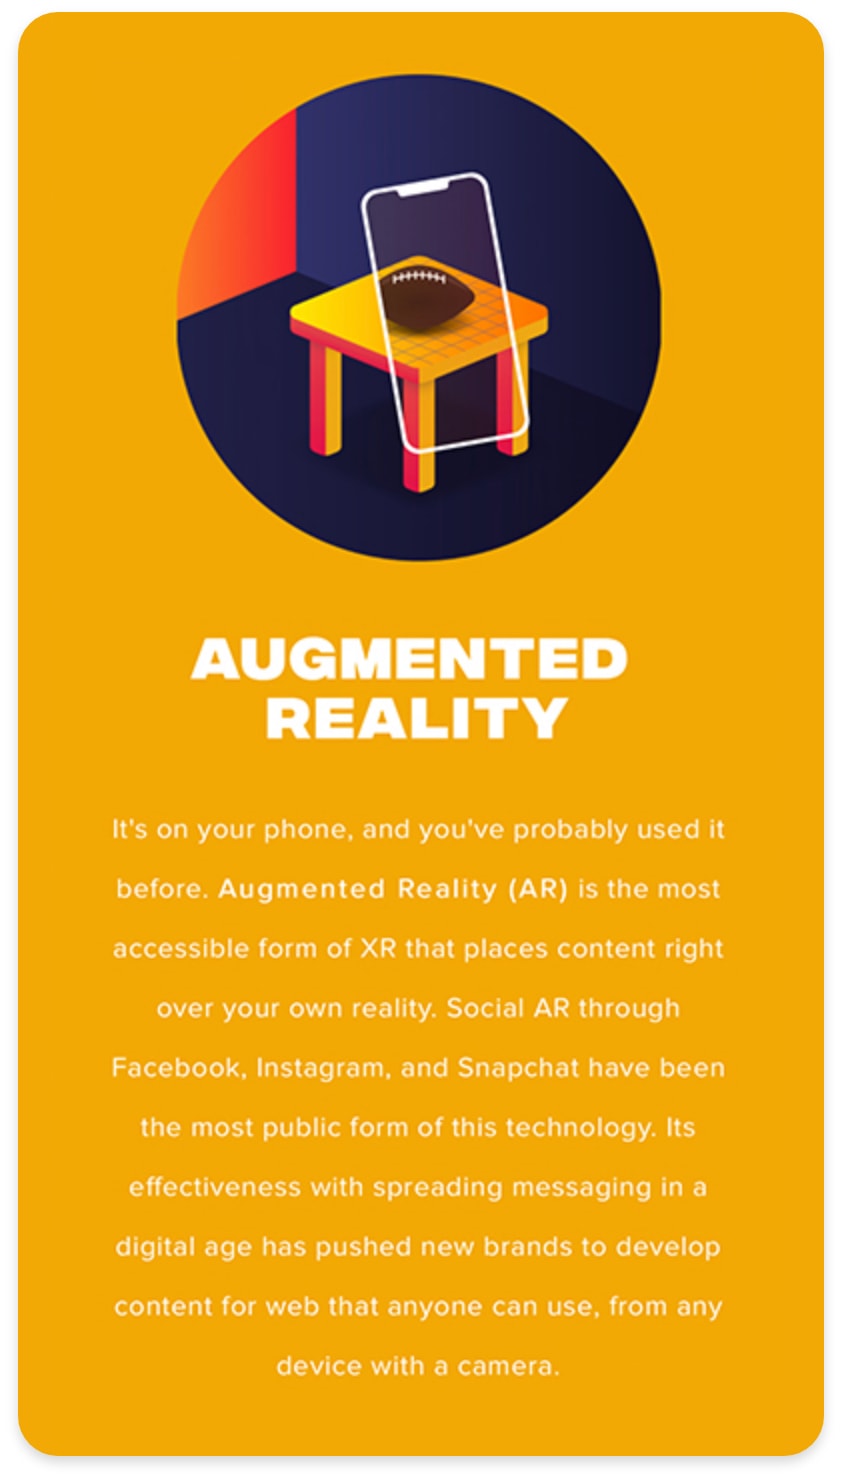 shot of a mobile view of the osxr website showing an image of a small table with a football on it and a mobile devices over it. Main text reads "augmented reality"